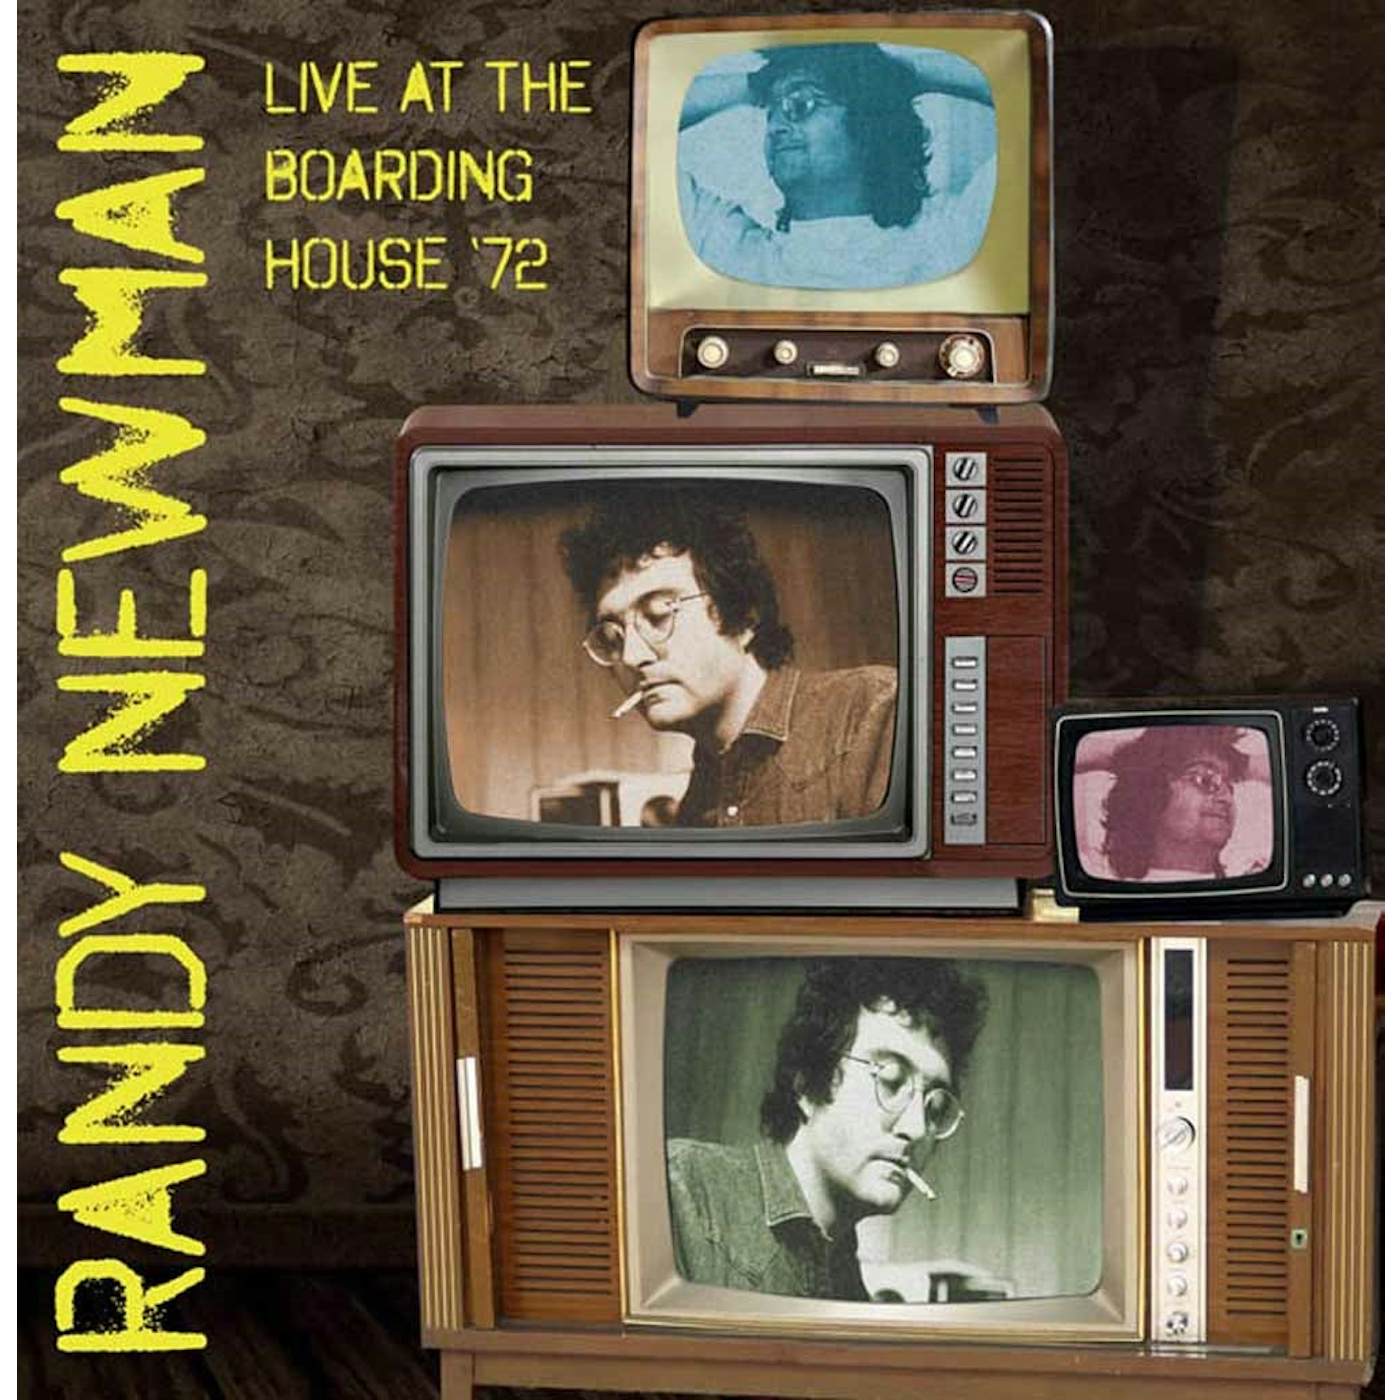 Randy Newman LP - Live At The Boarding House'72 (Vinyl)